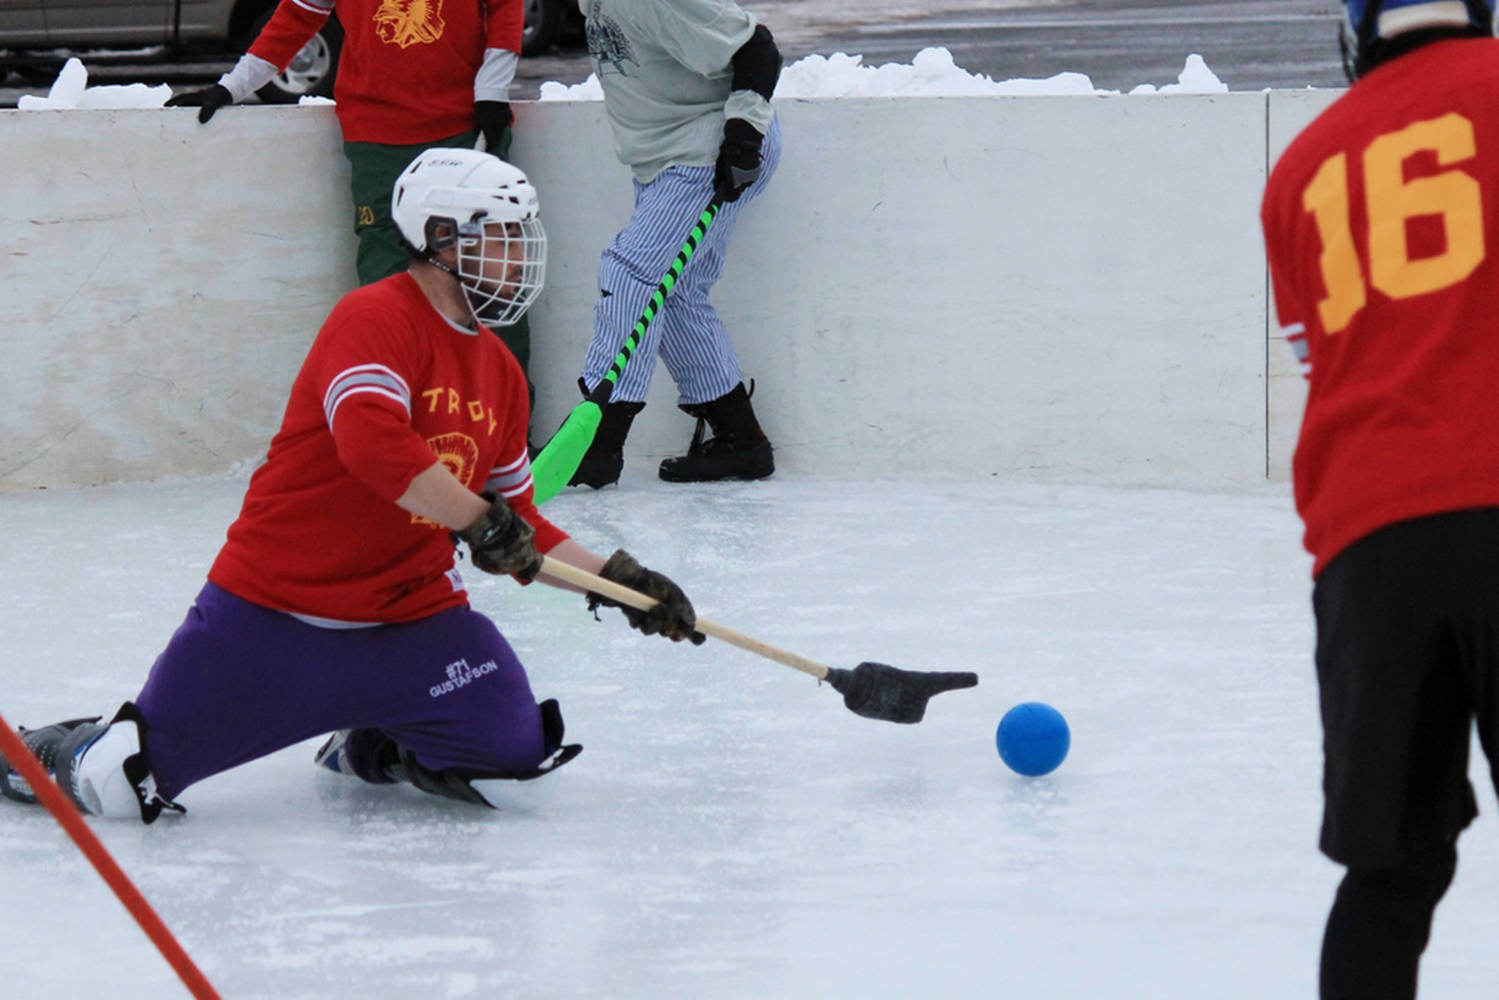 Broomball player in action from Red Team. Wallpaper